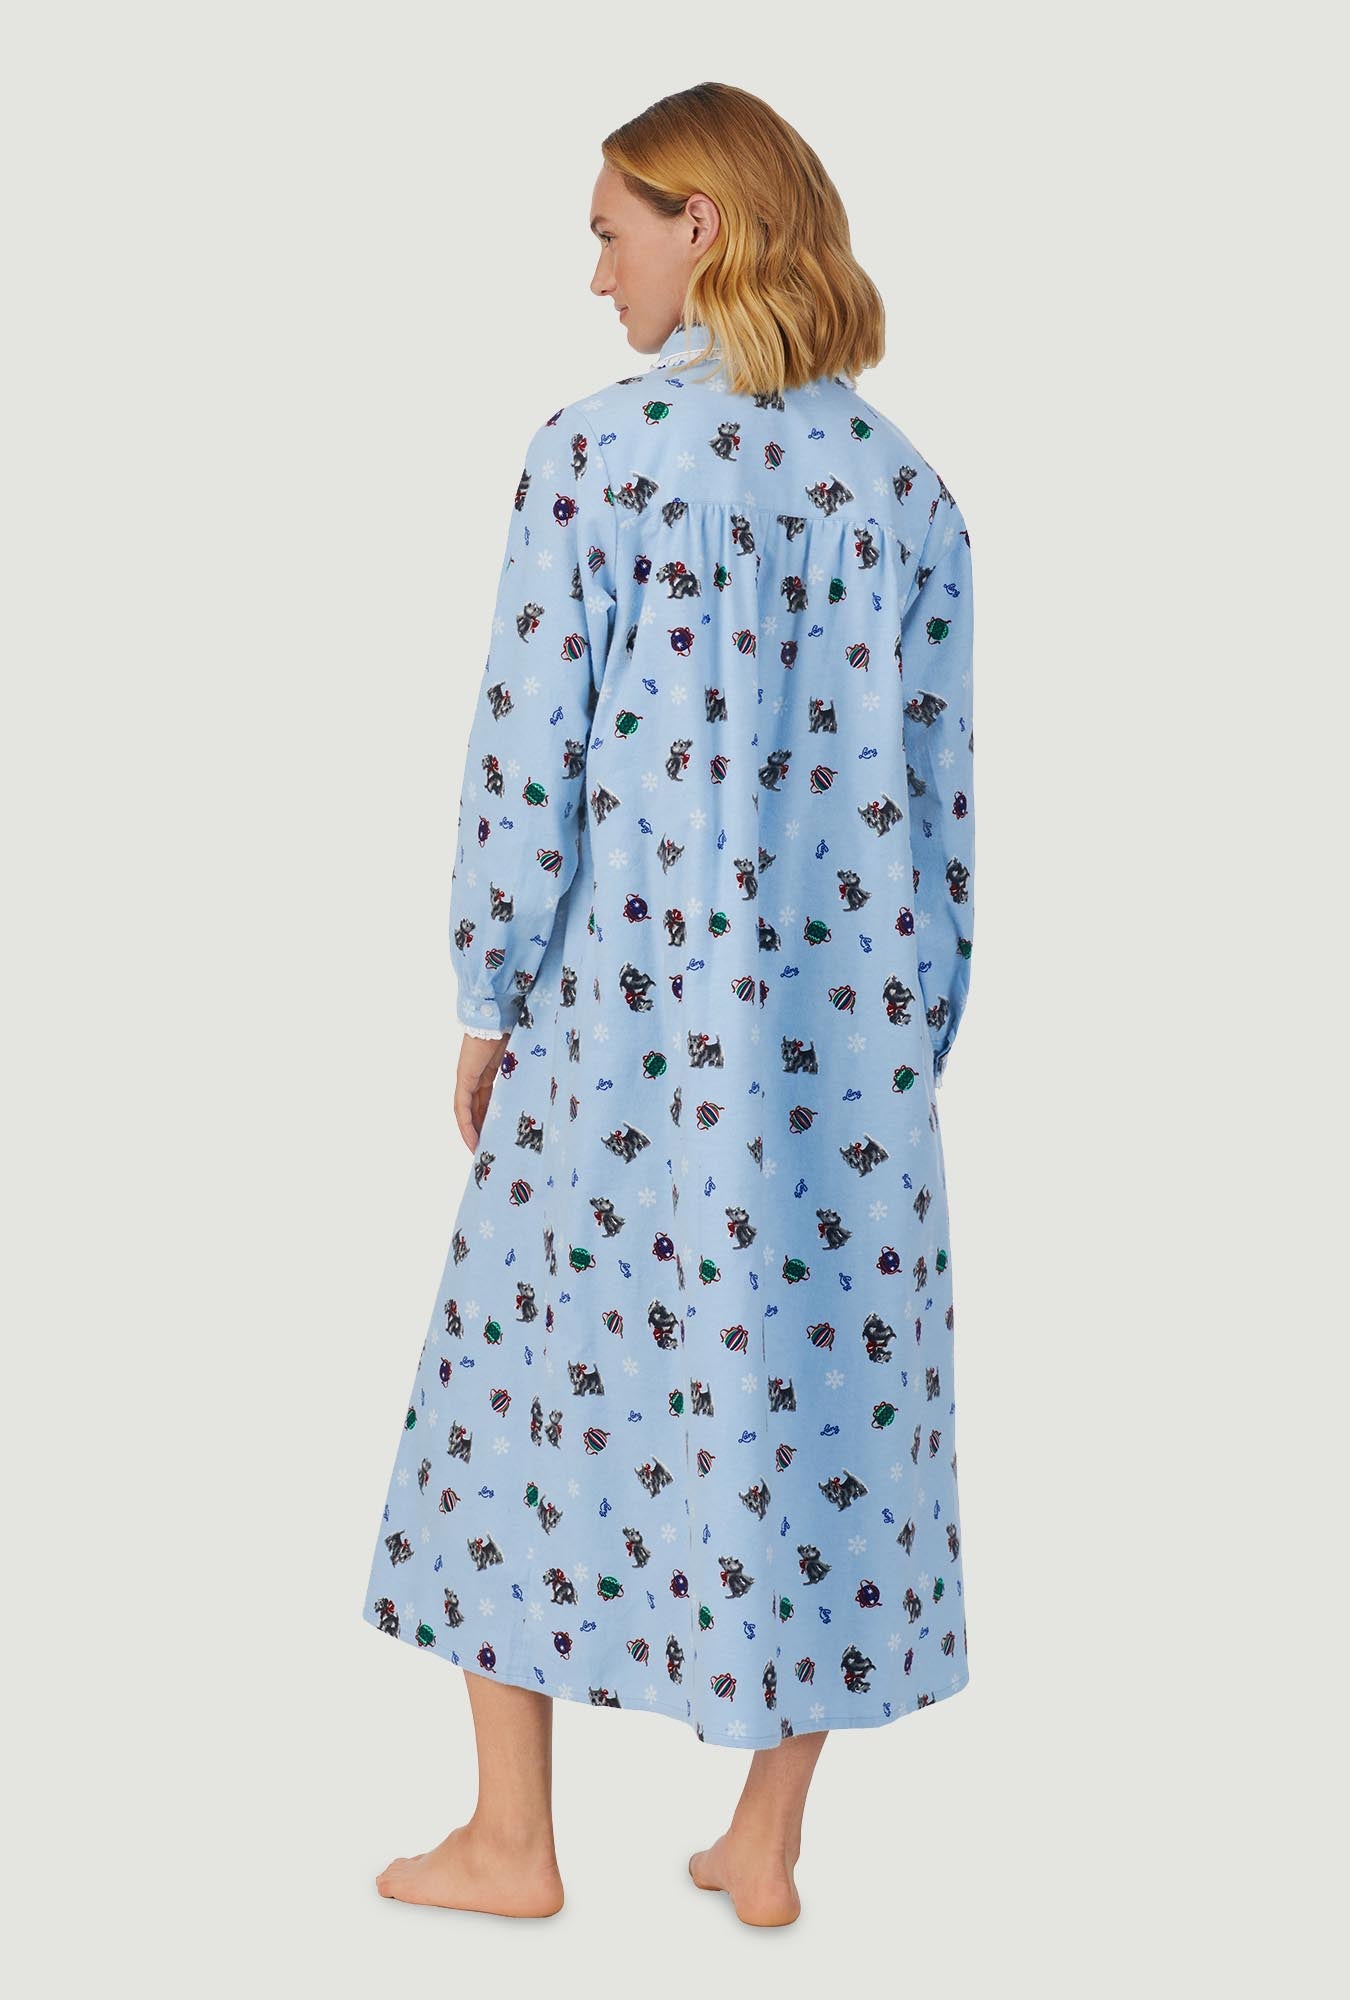 A lady wearing blue peter pan flannel gown with scottie dogs on parade print.